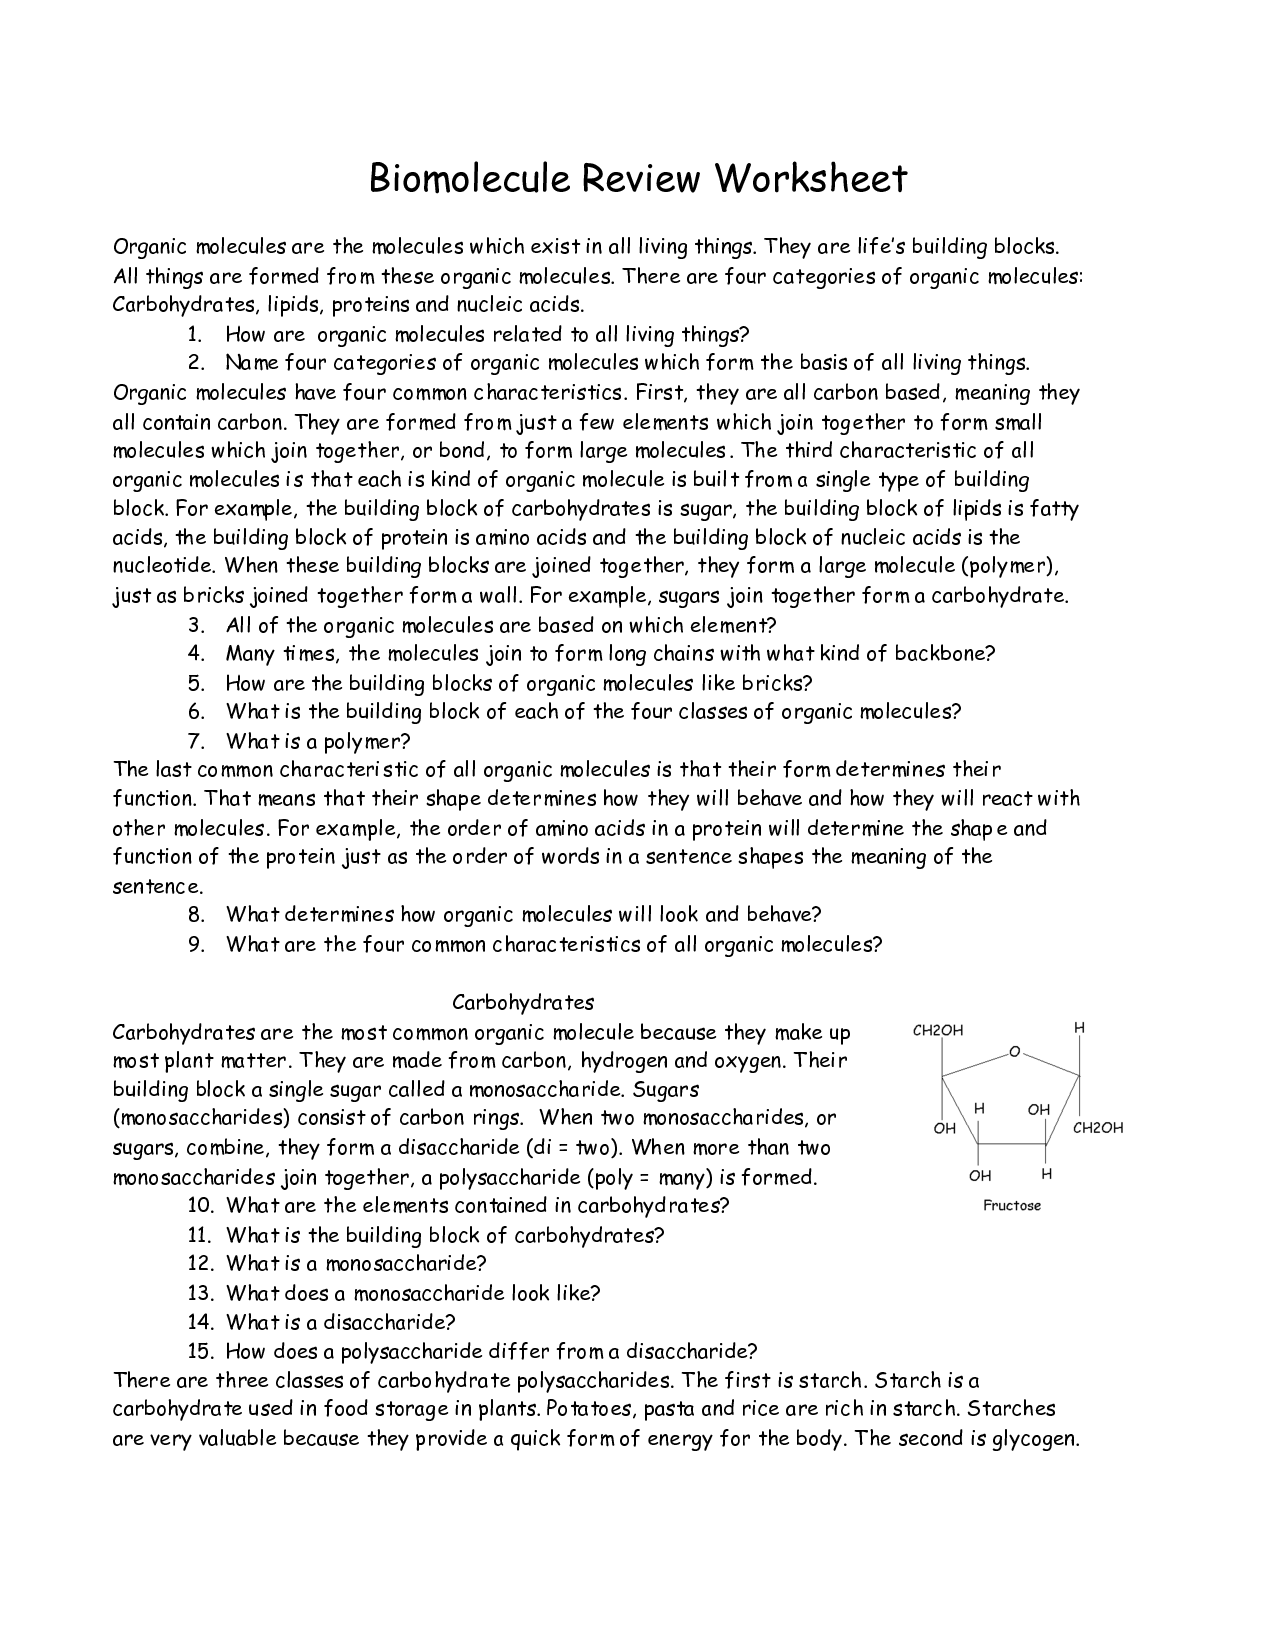 14 Best Images of Biological Molecules Worksheet Answers Organic